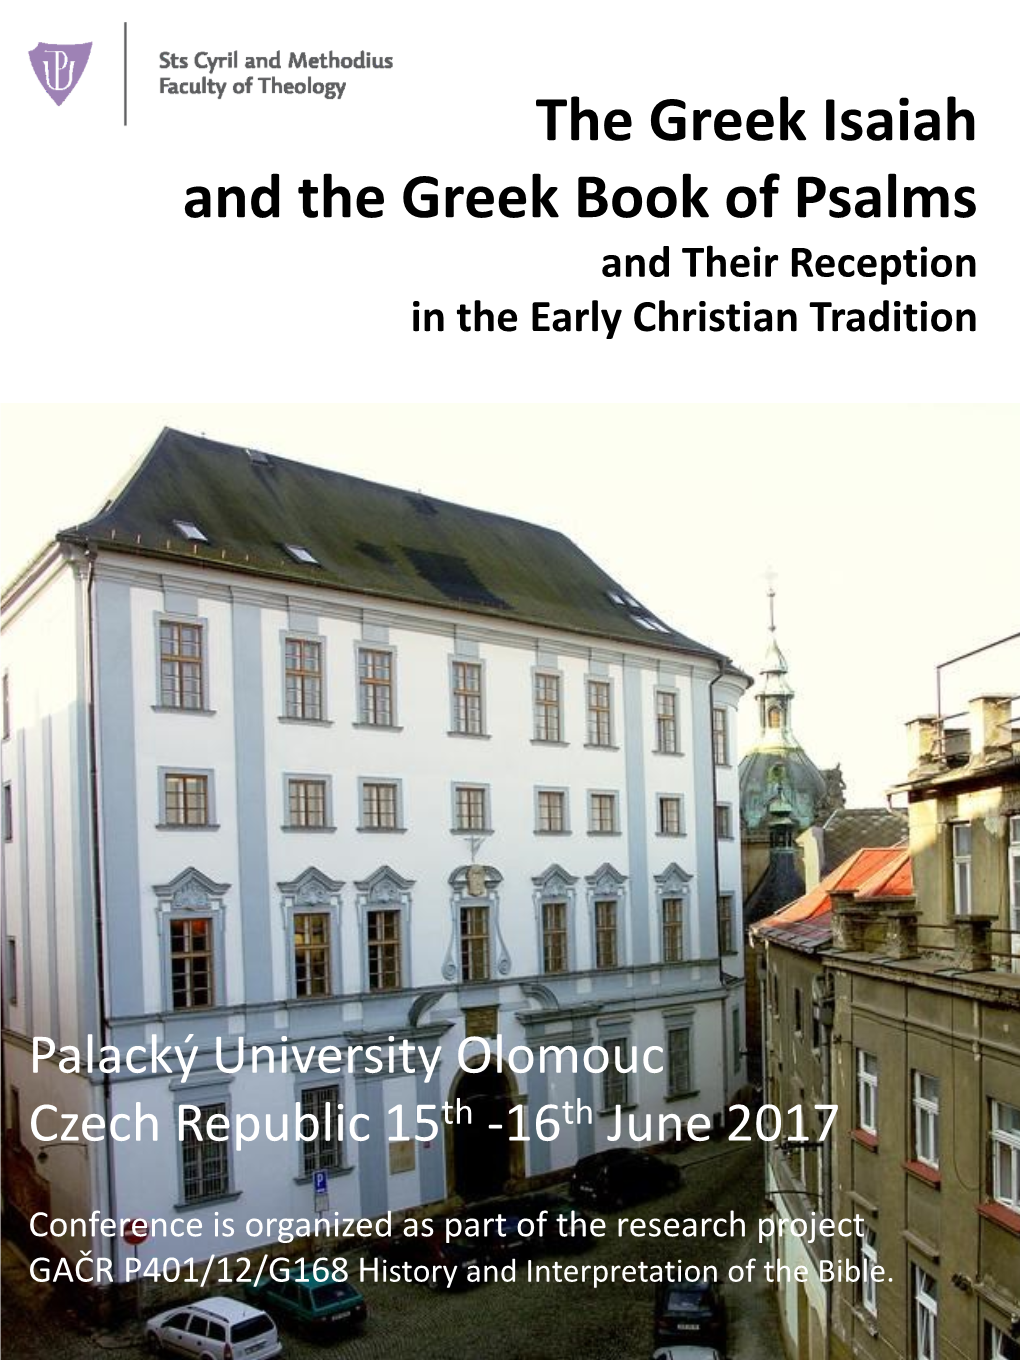 The Greek Isaiah and the Greek Book of Psalms and Their Reception in the Early Christian Tradition